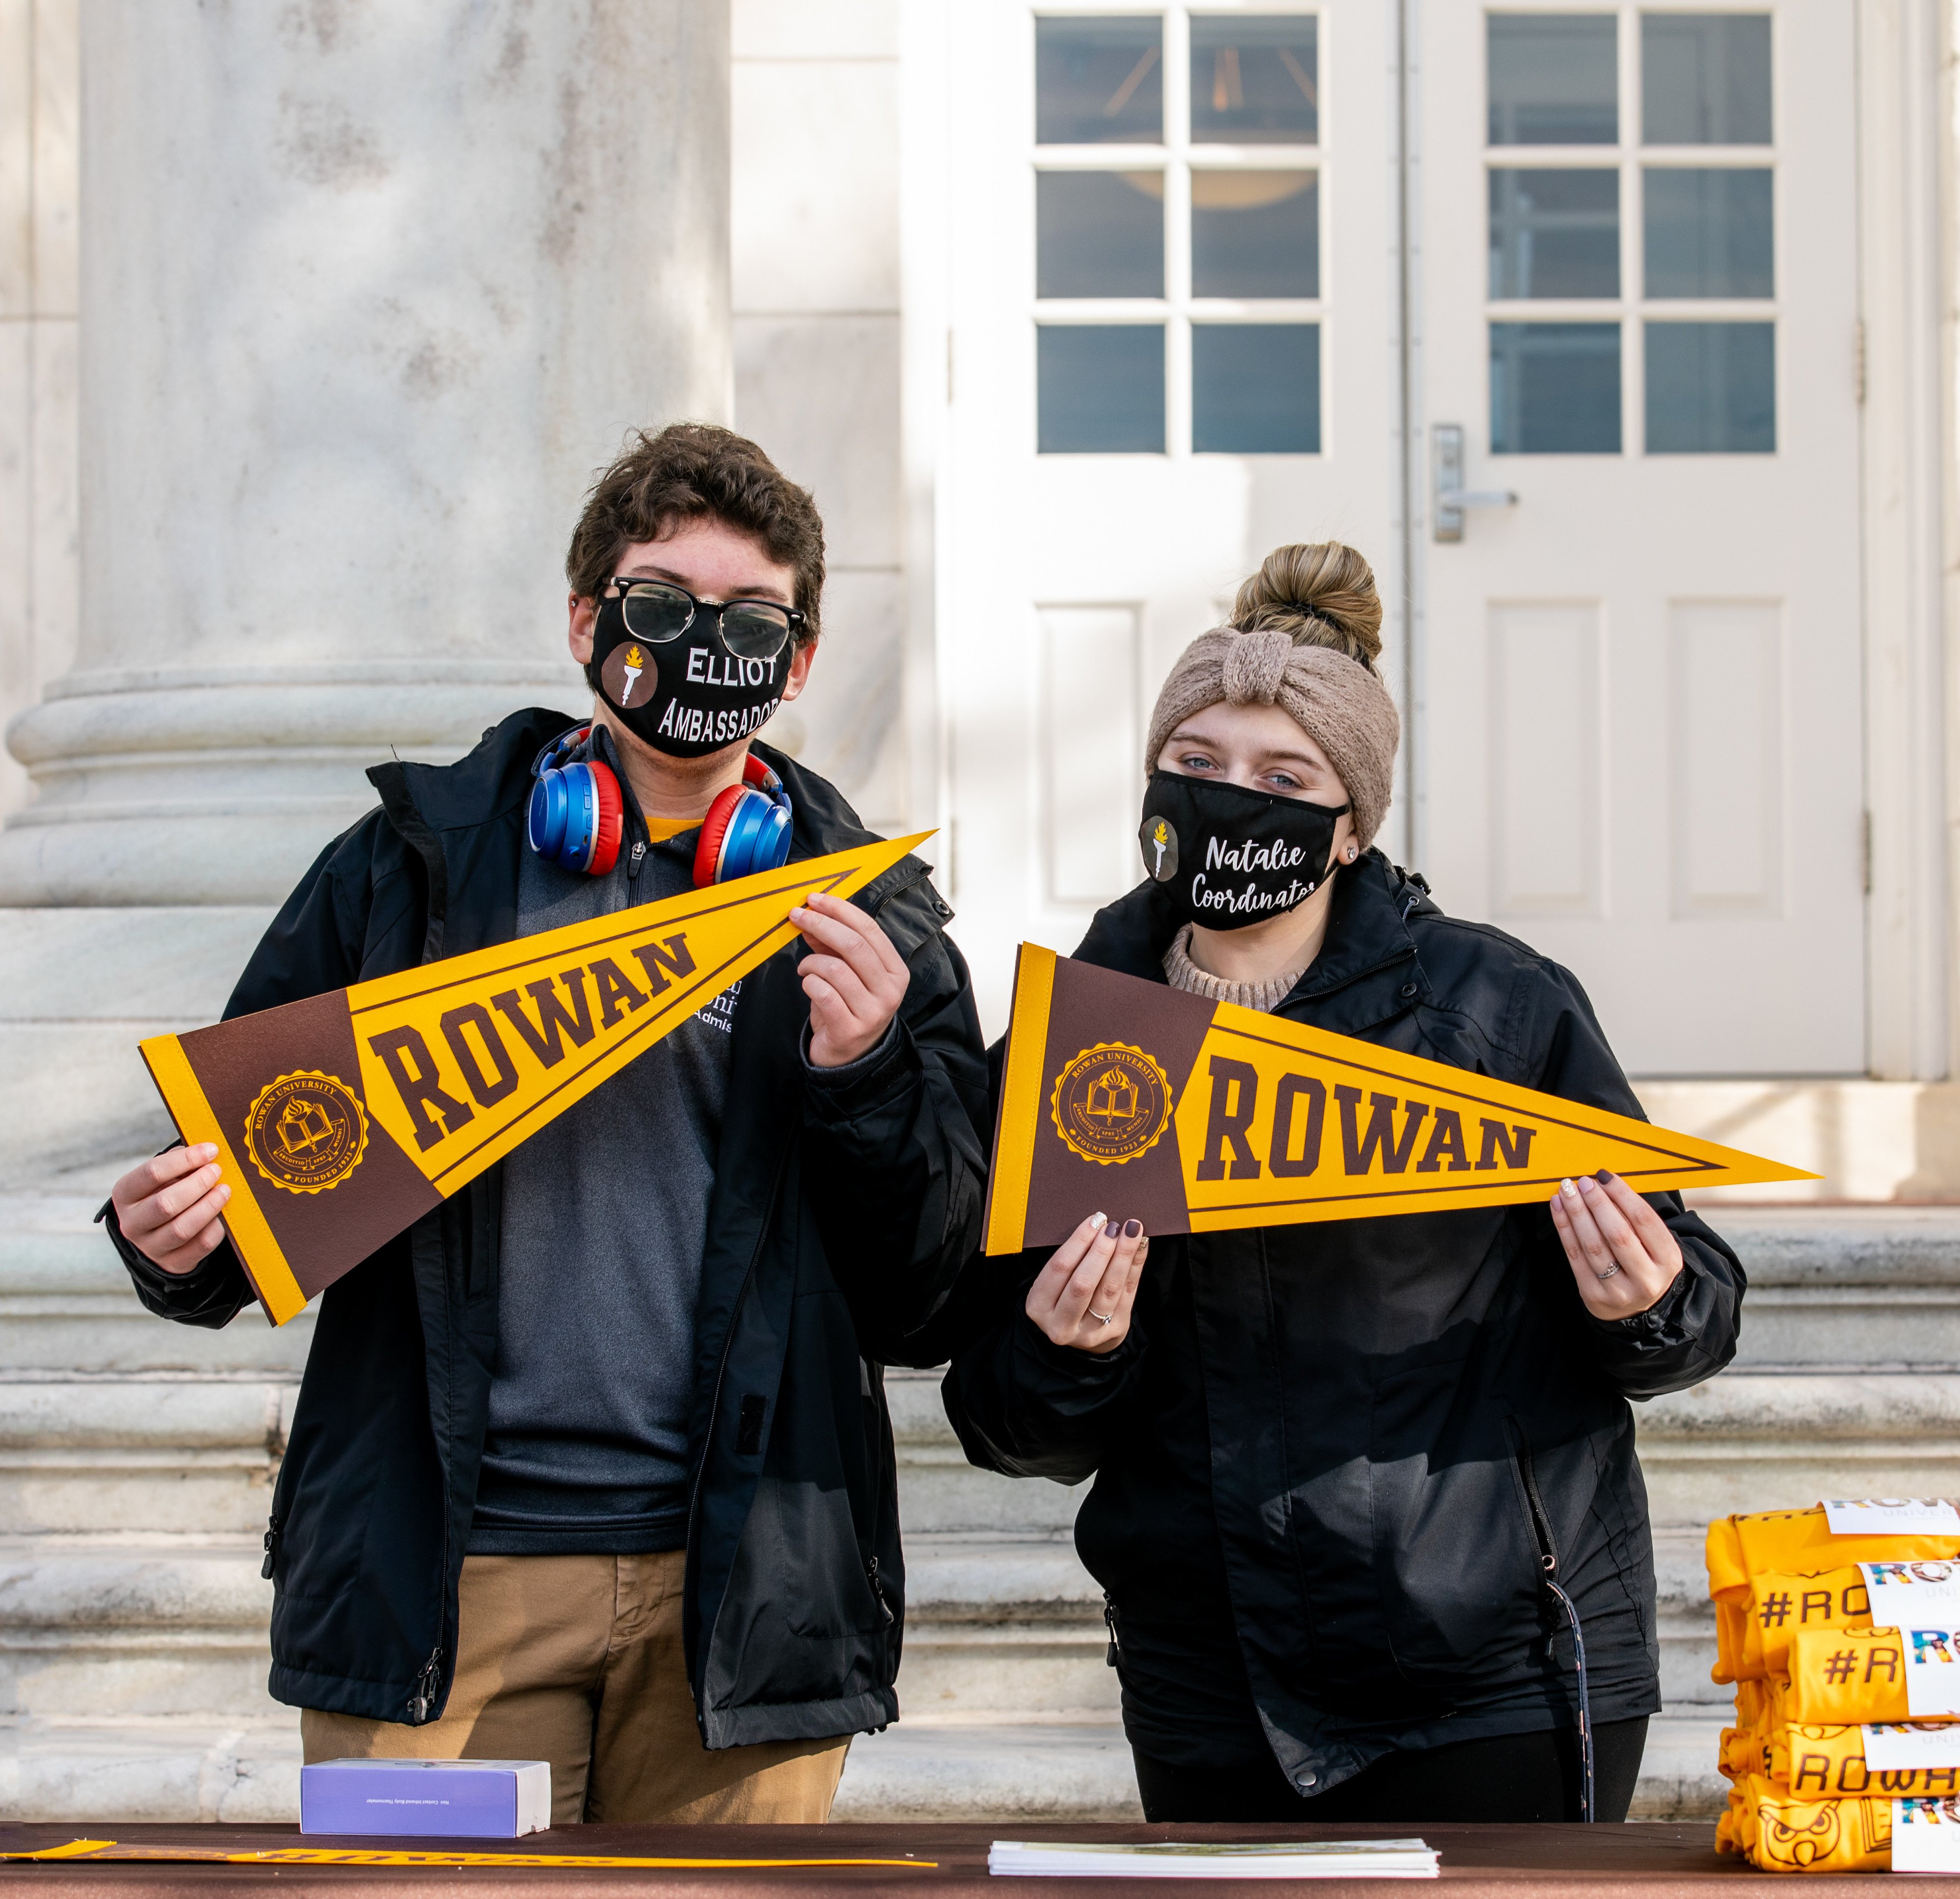 Two students standing holding Rowan pennants.